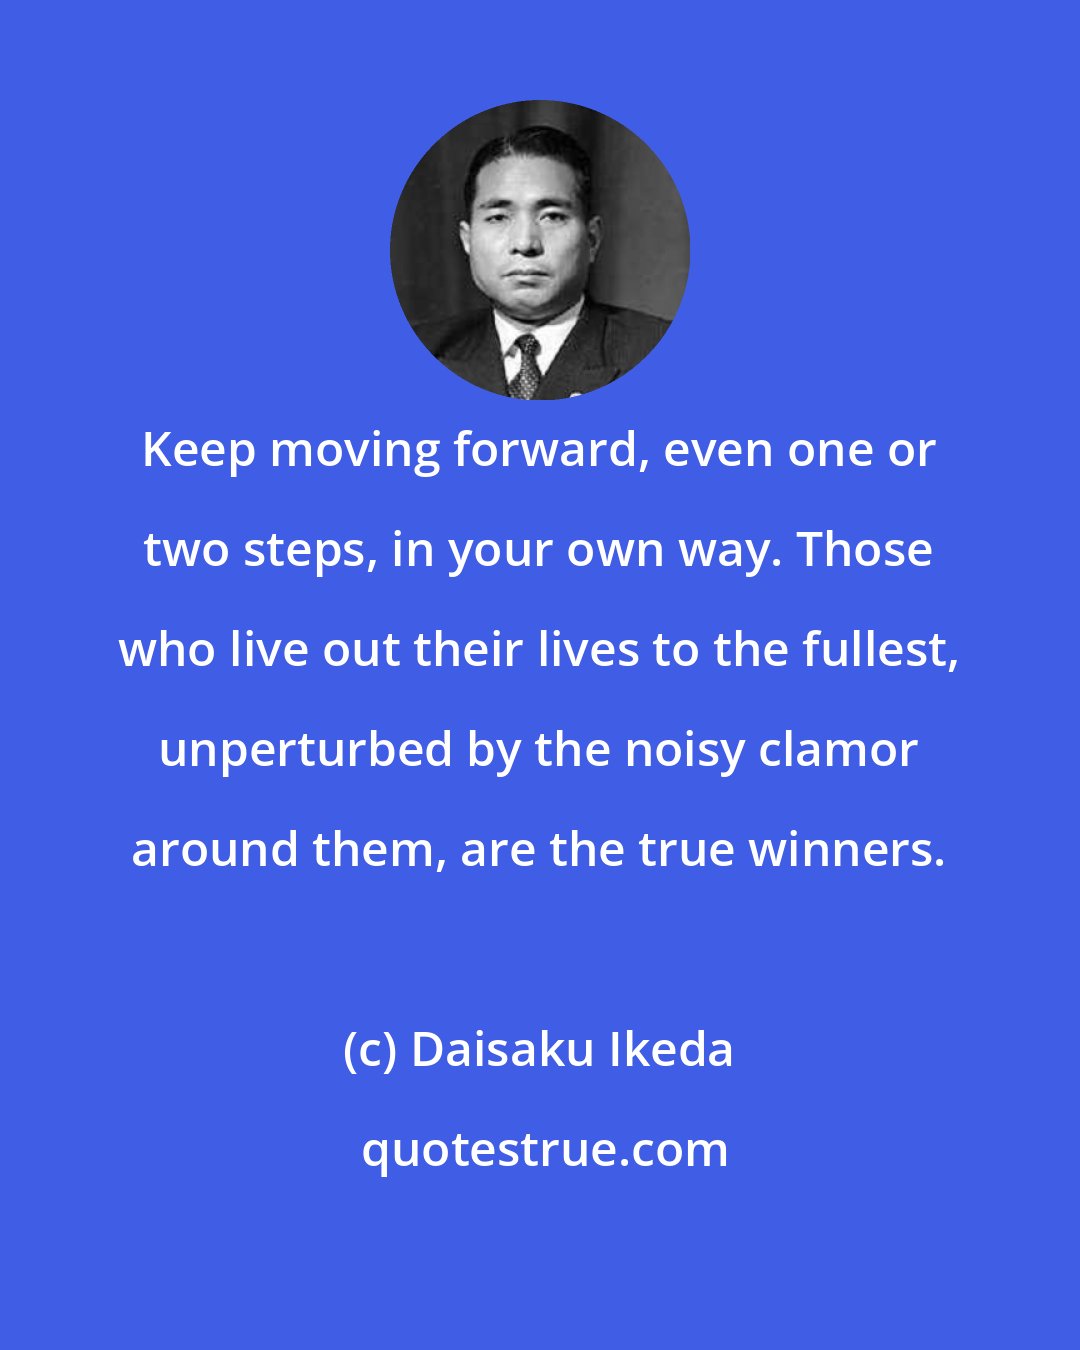 Daisaku Ikeda: Keep moving forward, even one or two steps, in your own way. Those who live out their lives to the fullest, unperturbed by the noisy clamor around them, are the true winners.